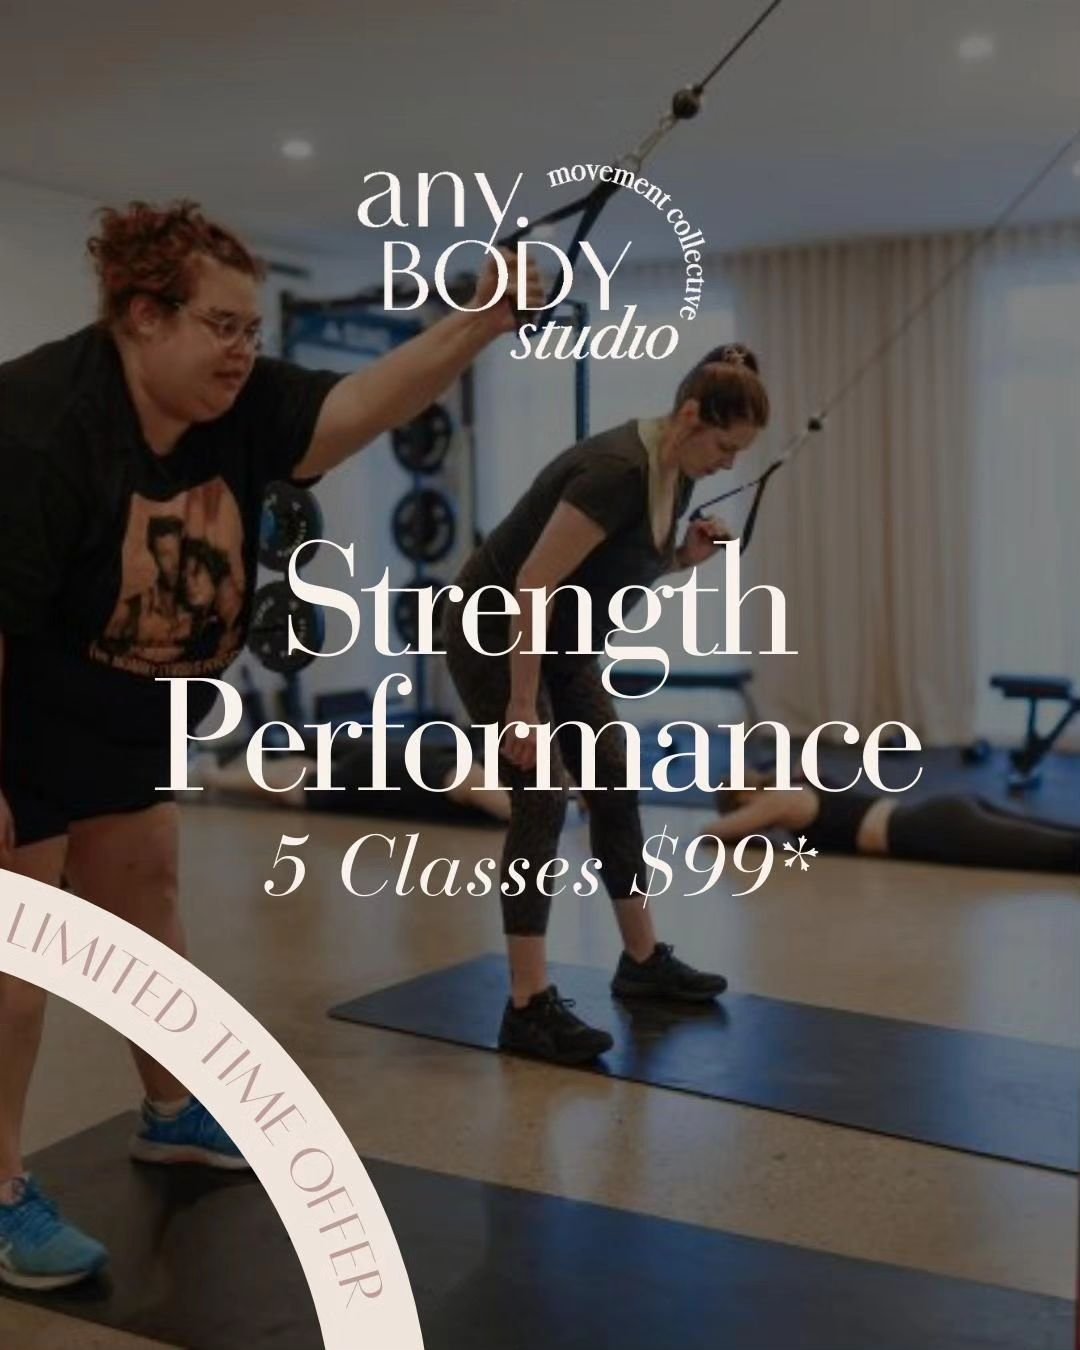 We are bringing back our opening special for our Strength Performance Classes for one more round! If you missed out on the first round to try our brand new strength classes and want to give it a go, now is the time!

This is a limited time only offer